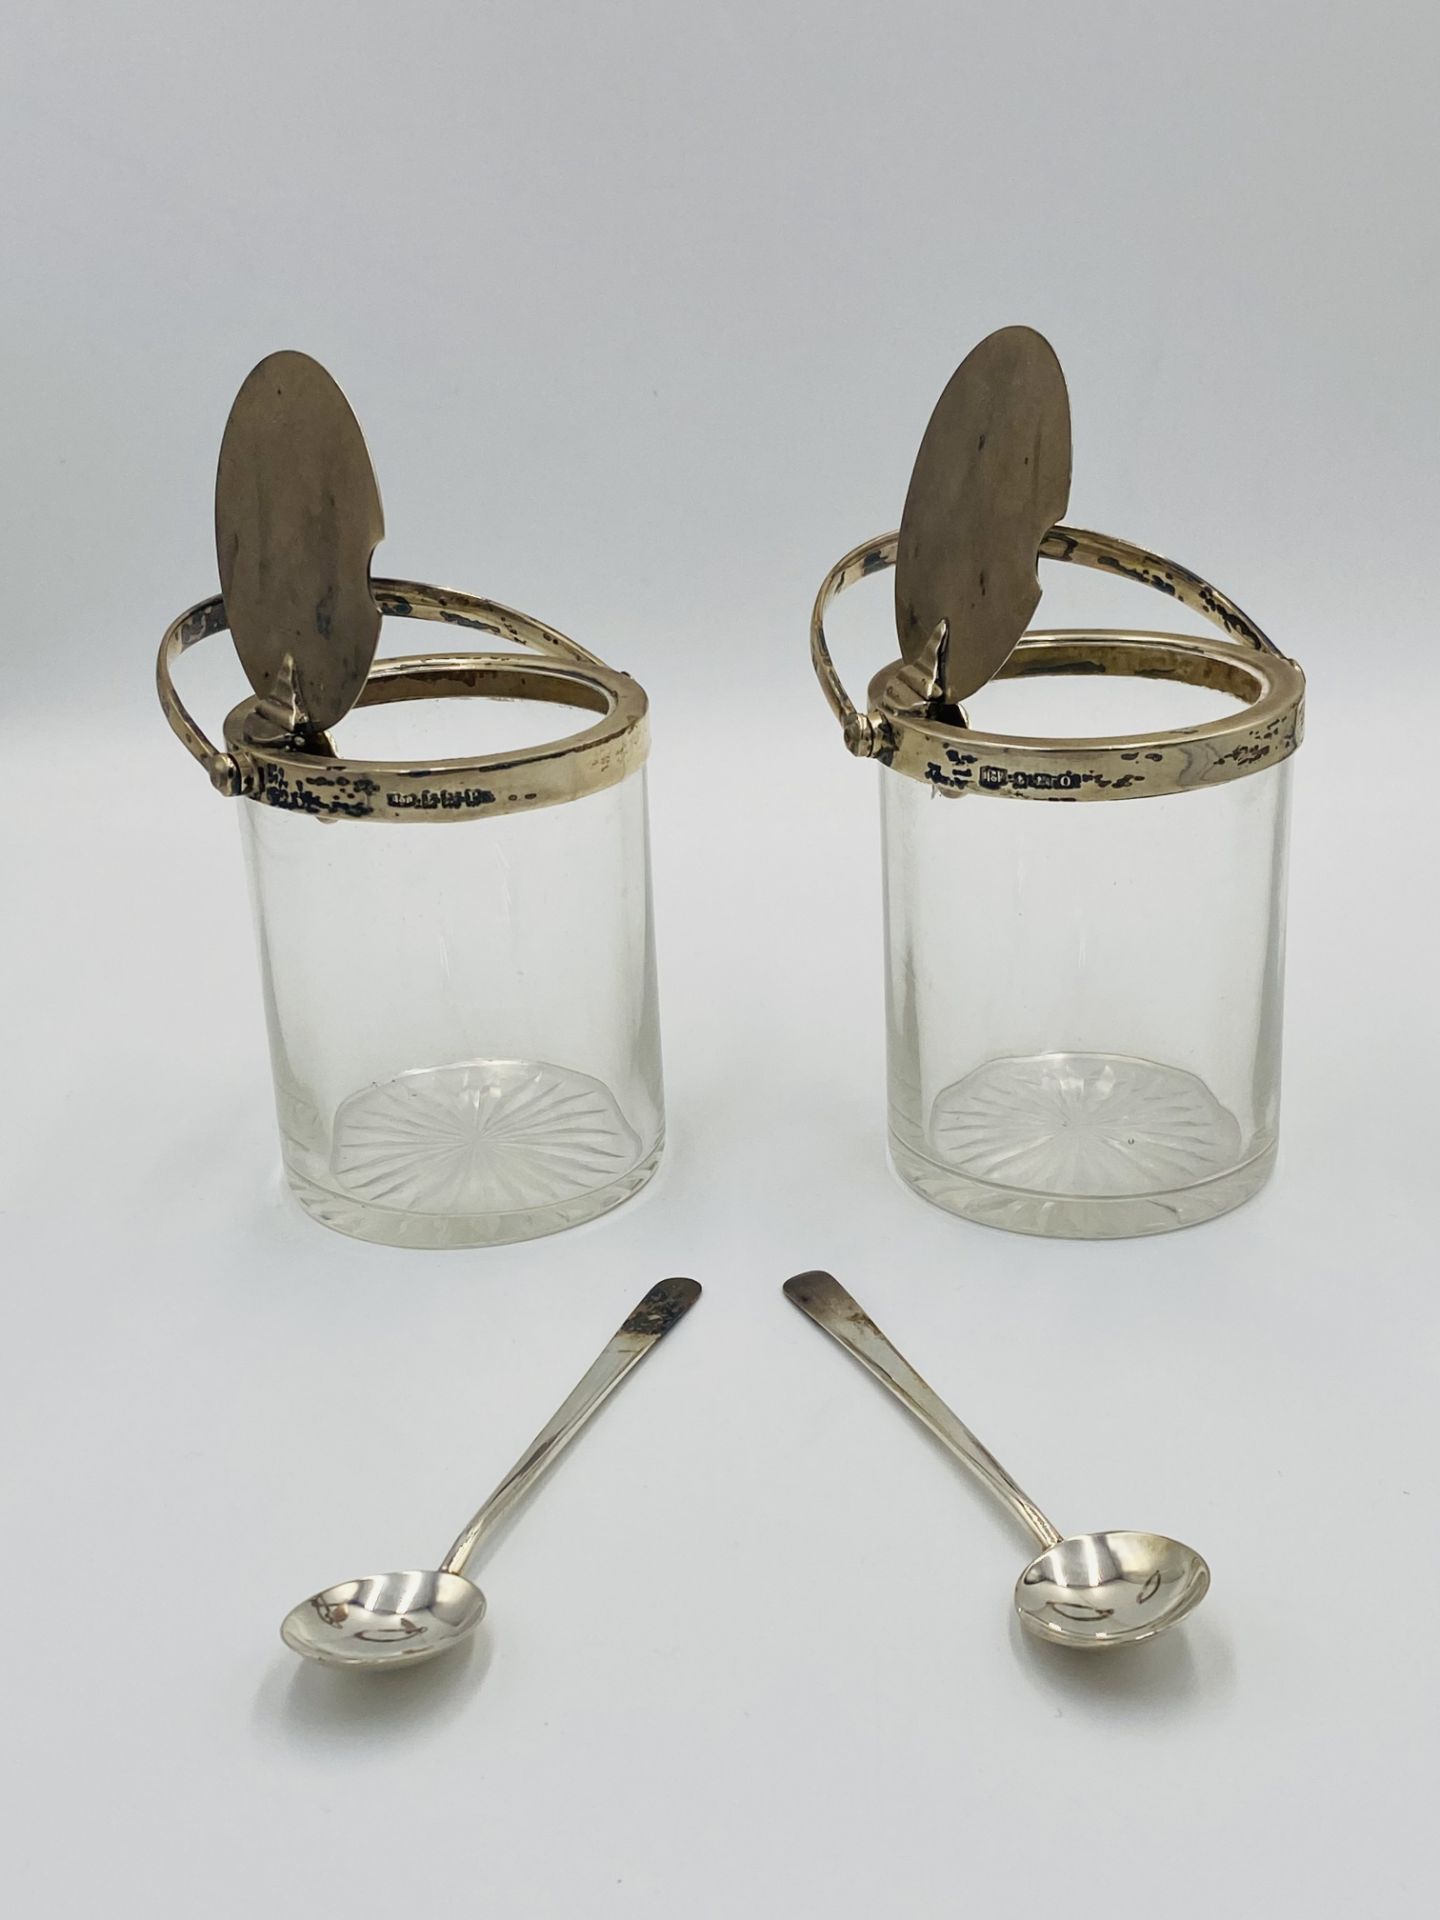 Pair of silver mounted, glass preserve jars with star cut bases - Image 4 of 6